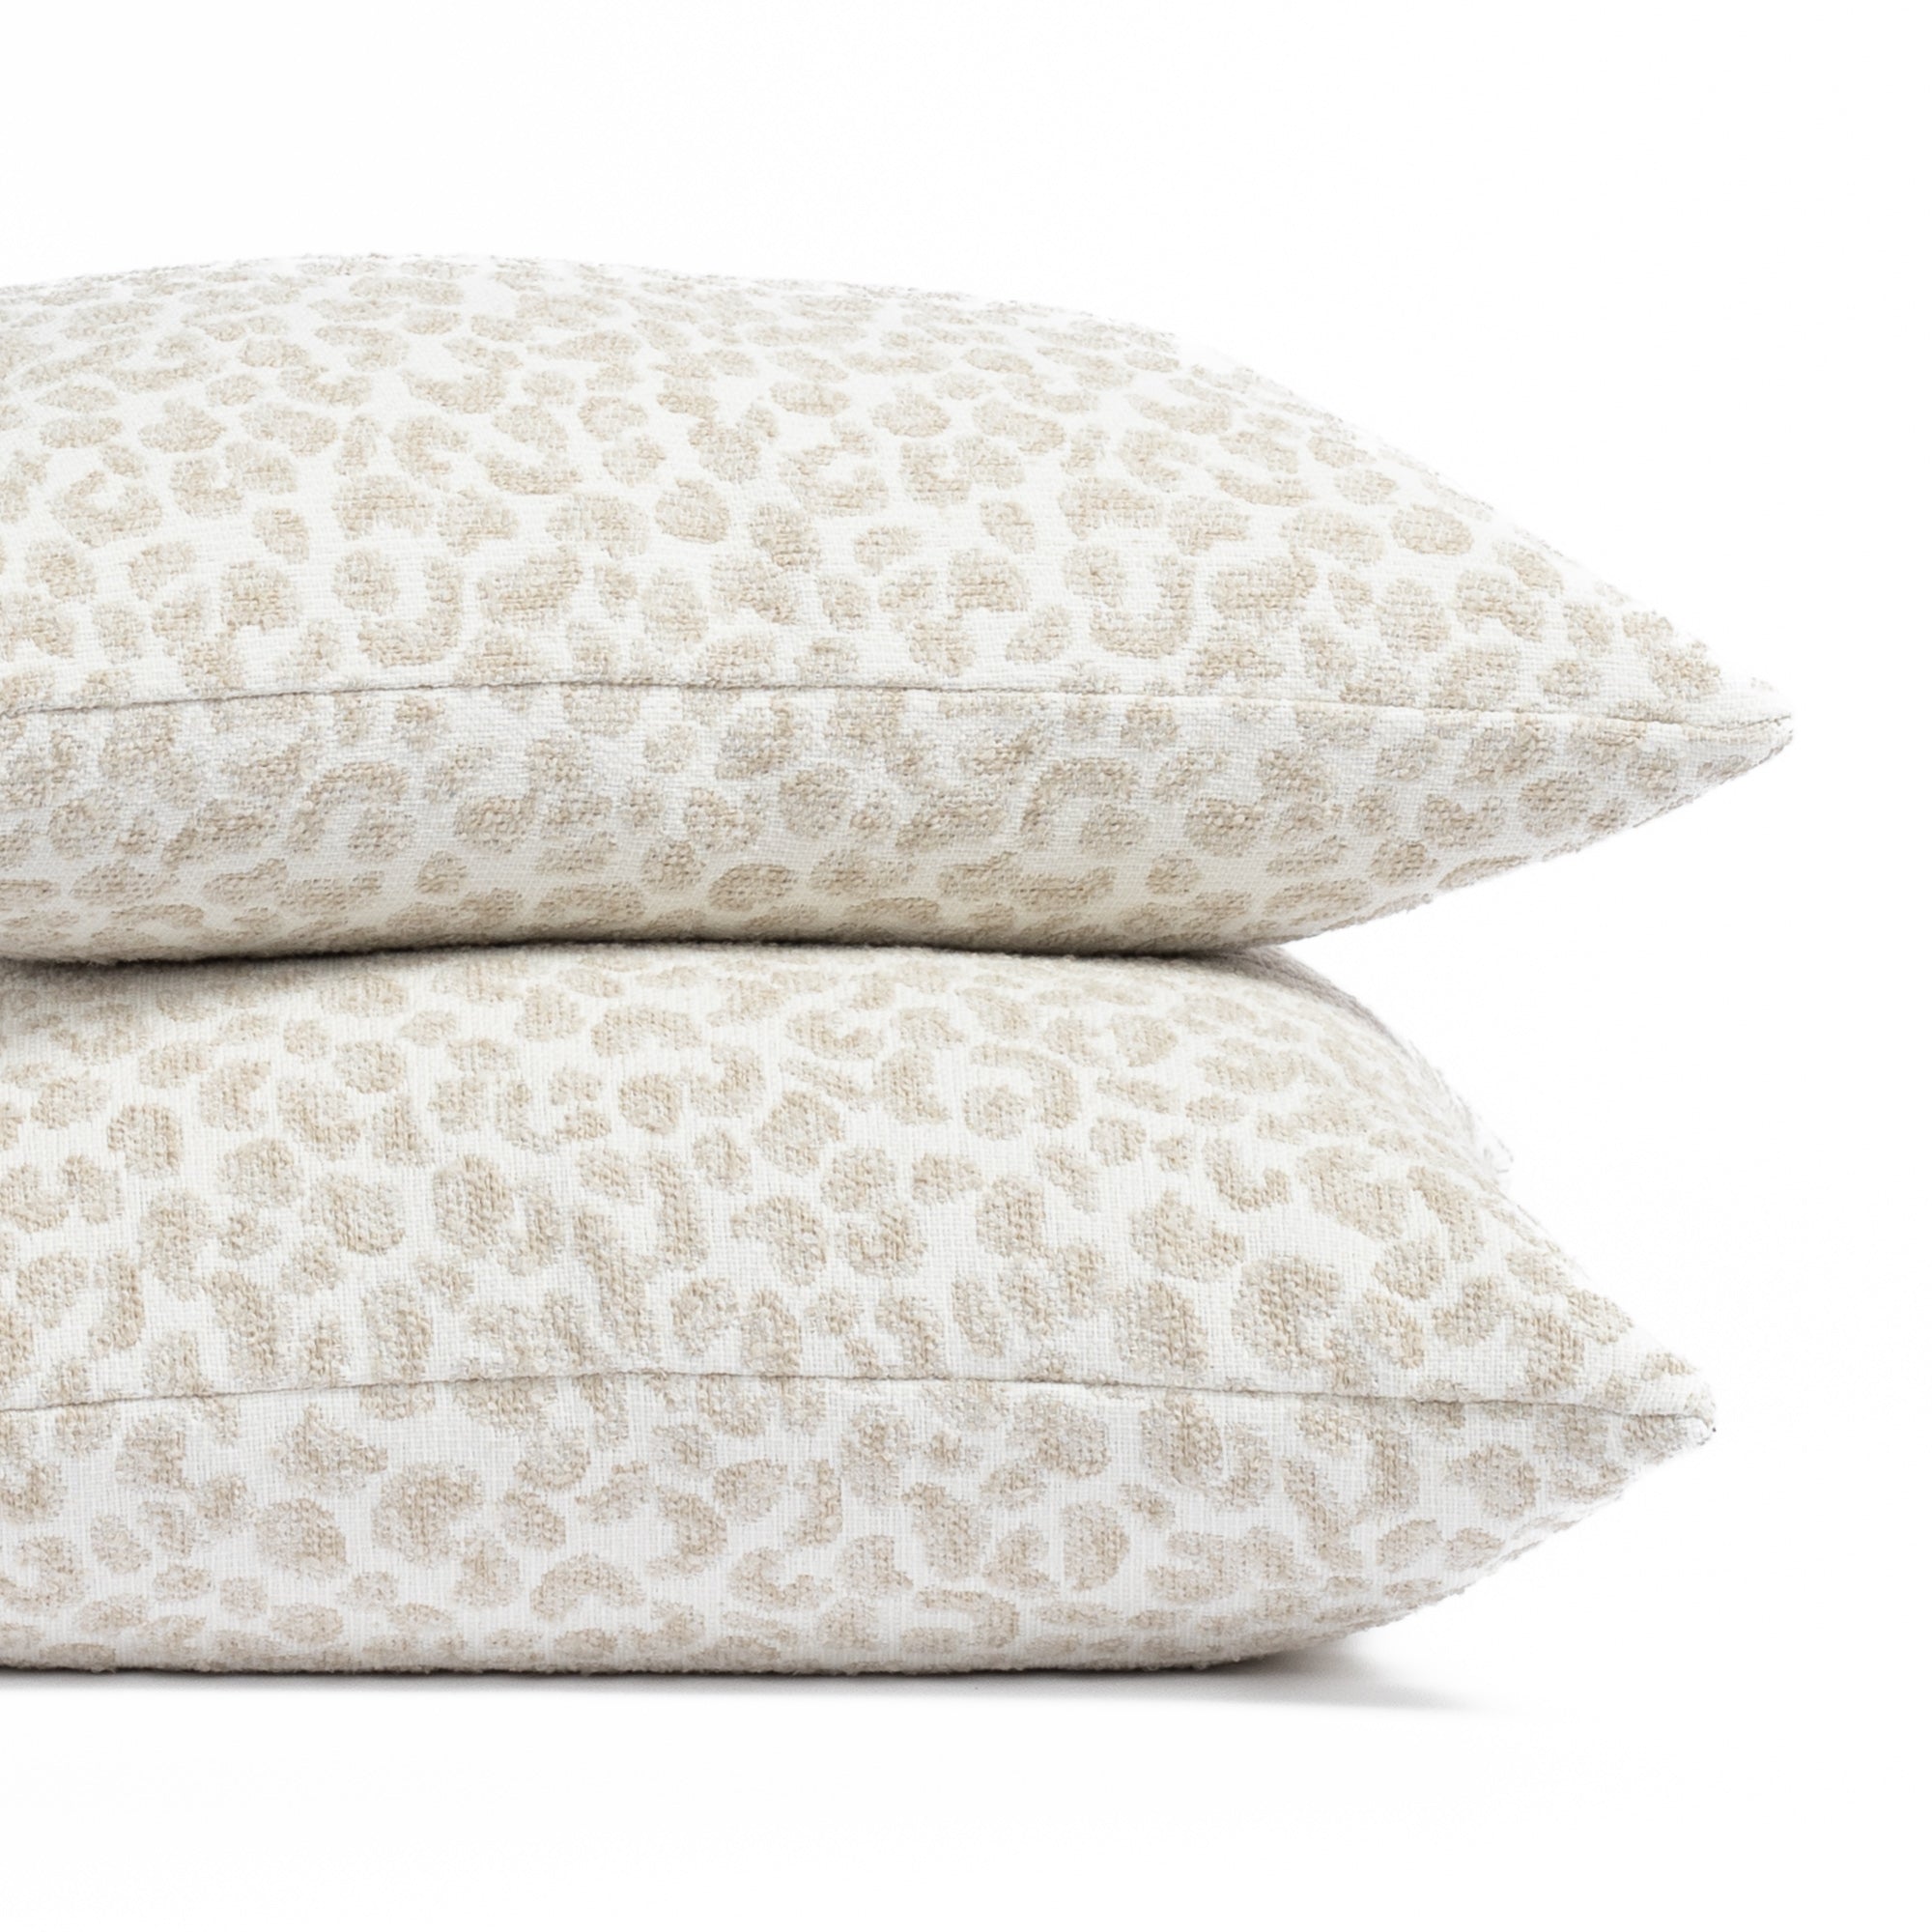 Lucia creamy white and taupe beige speckled cheetah patterned Tonic Living pillows